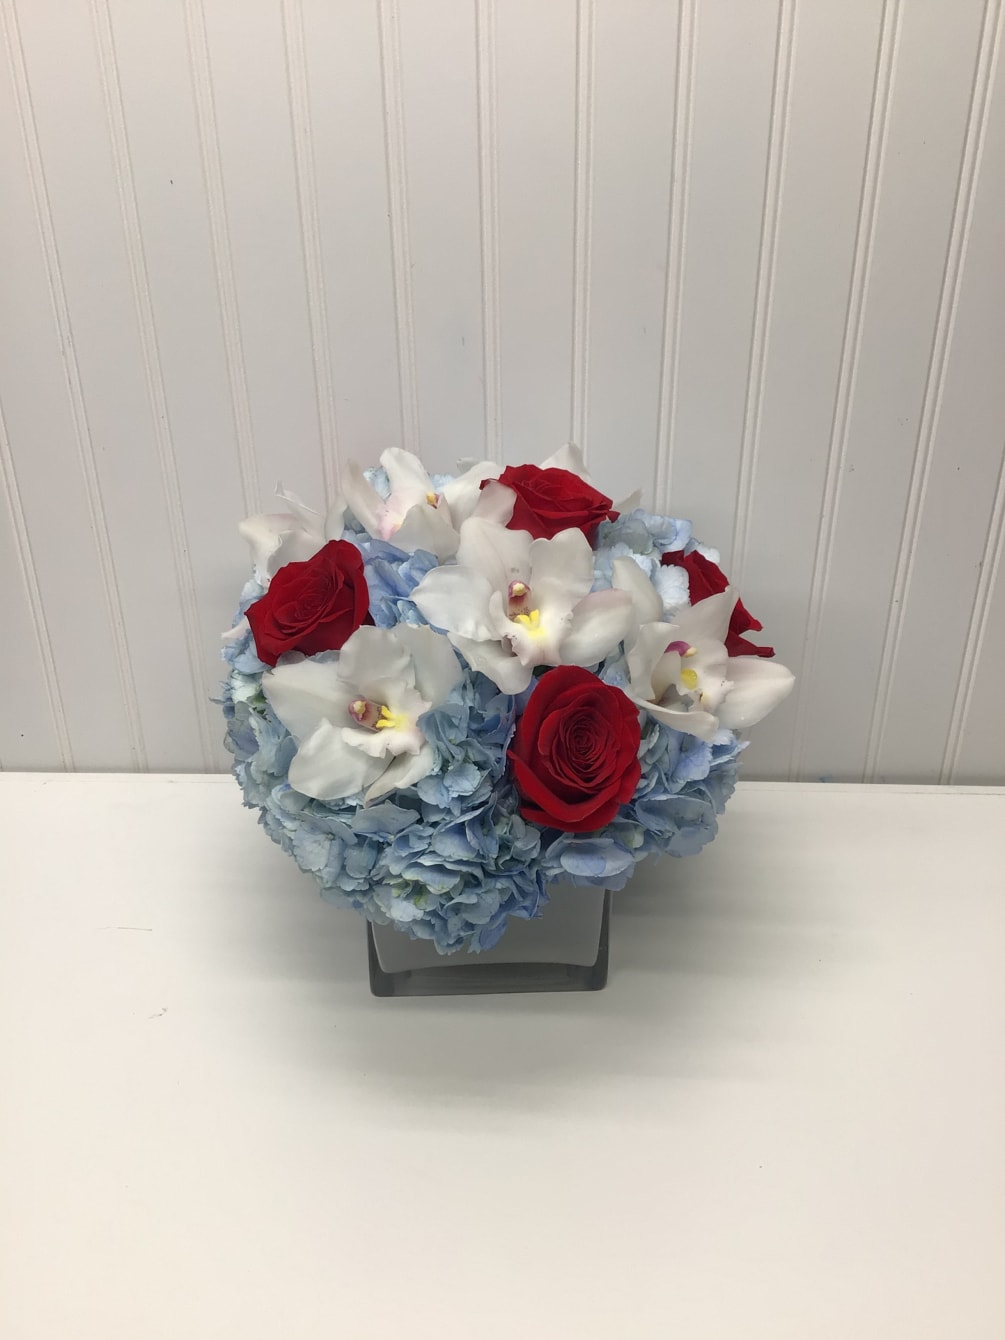 Lovely reds and blues with white come together in this romantic gift